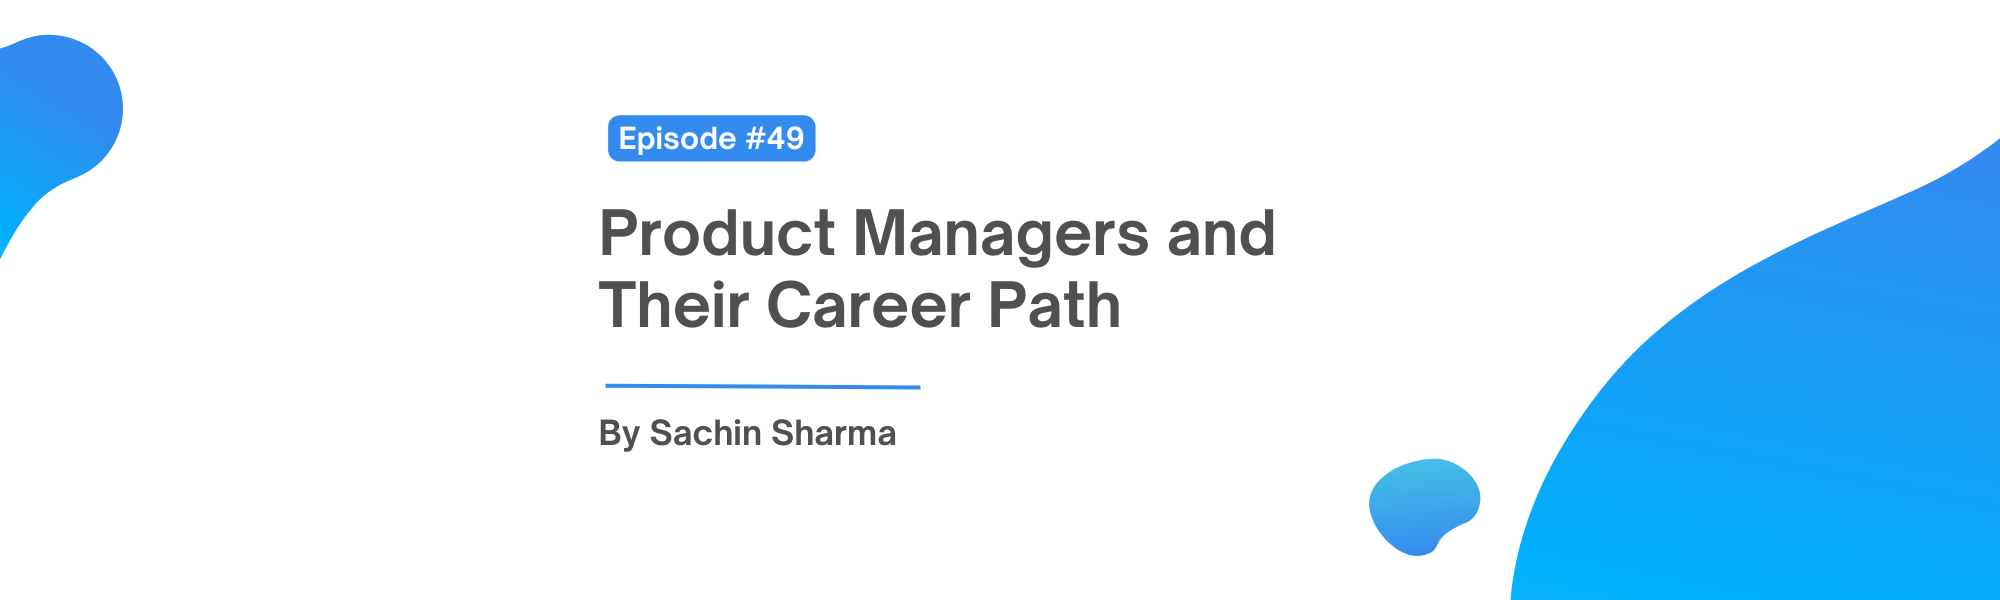 Product Managers and Their Career Path